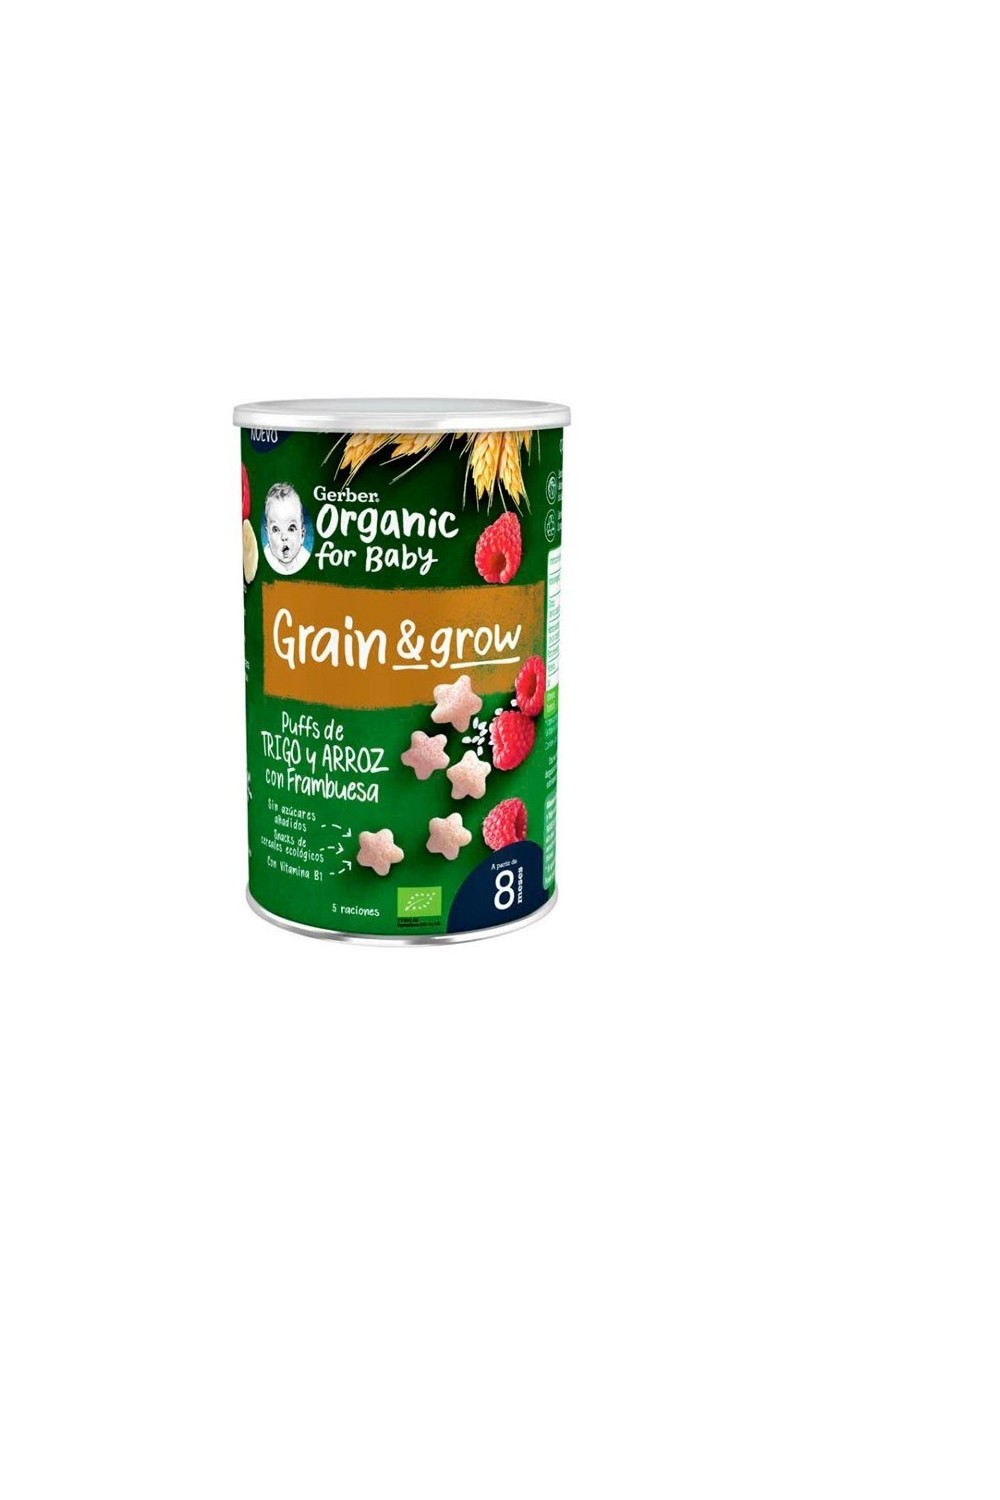 Gerber Snack Organic Cereals and Raspberry 35g